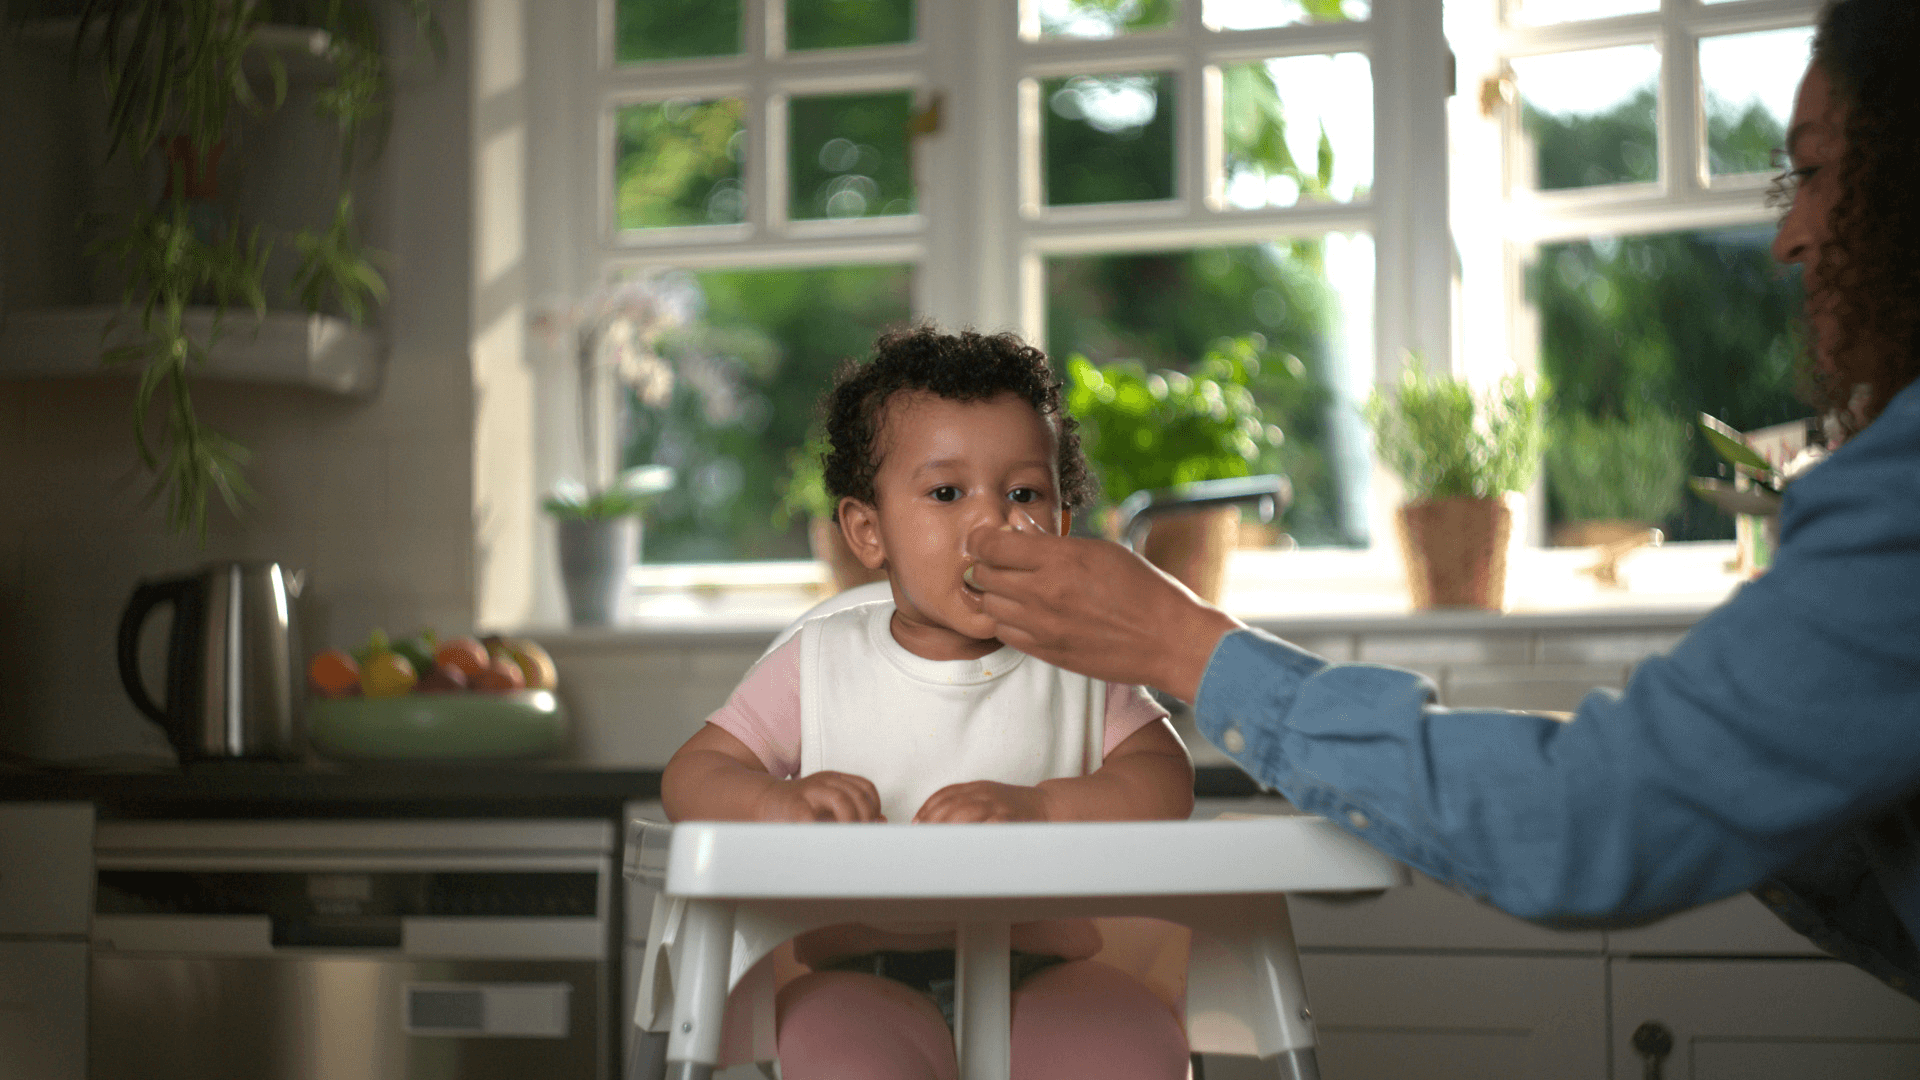 Baby in a kitchen, on a highchair, eating food being fed by mother